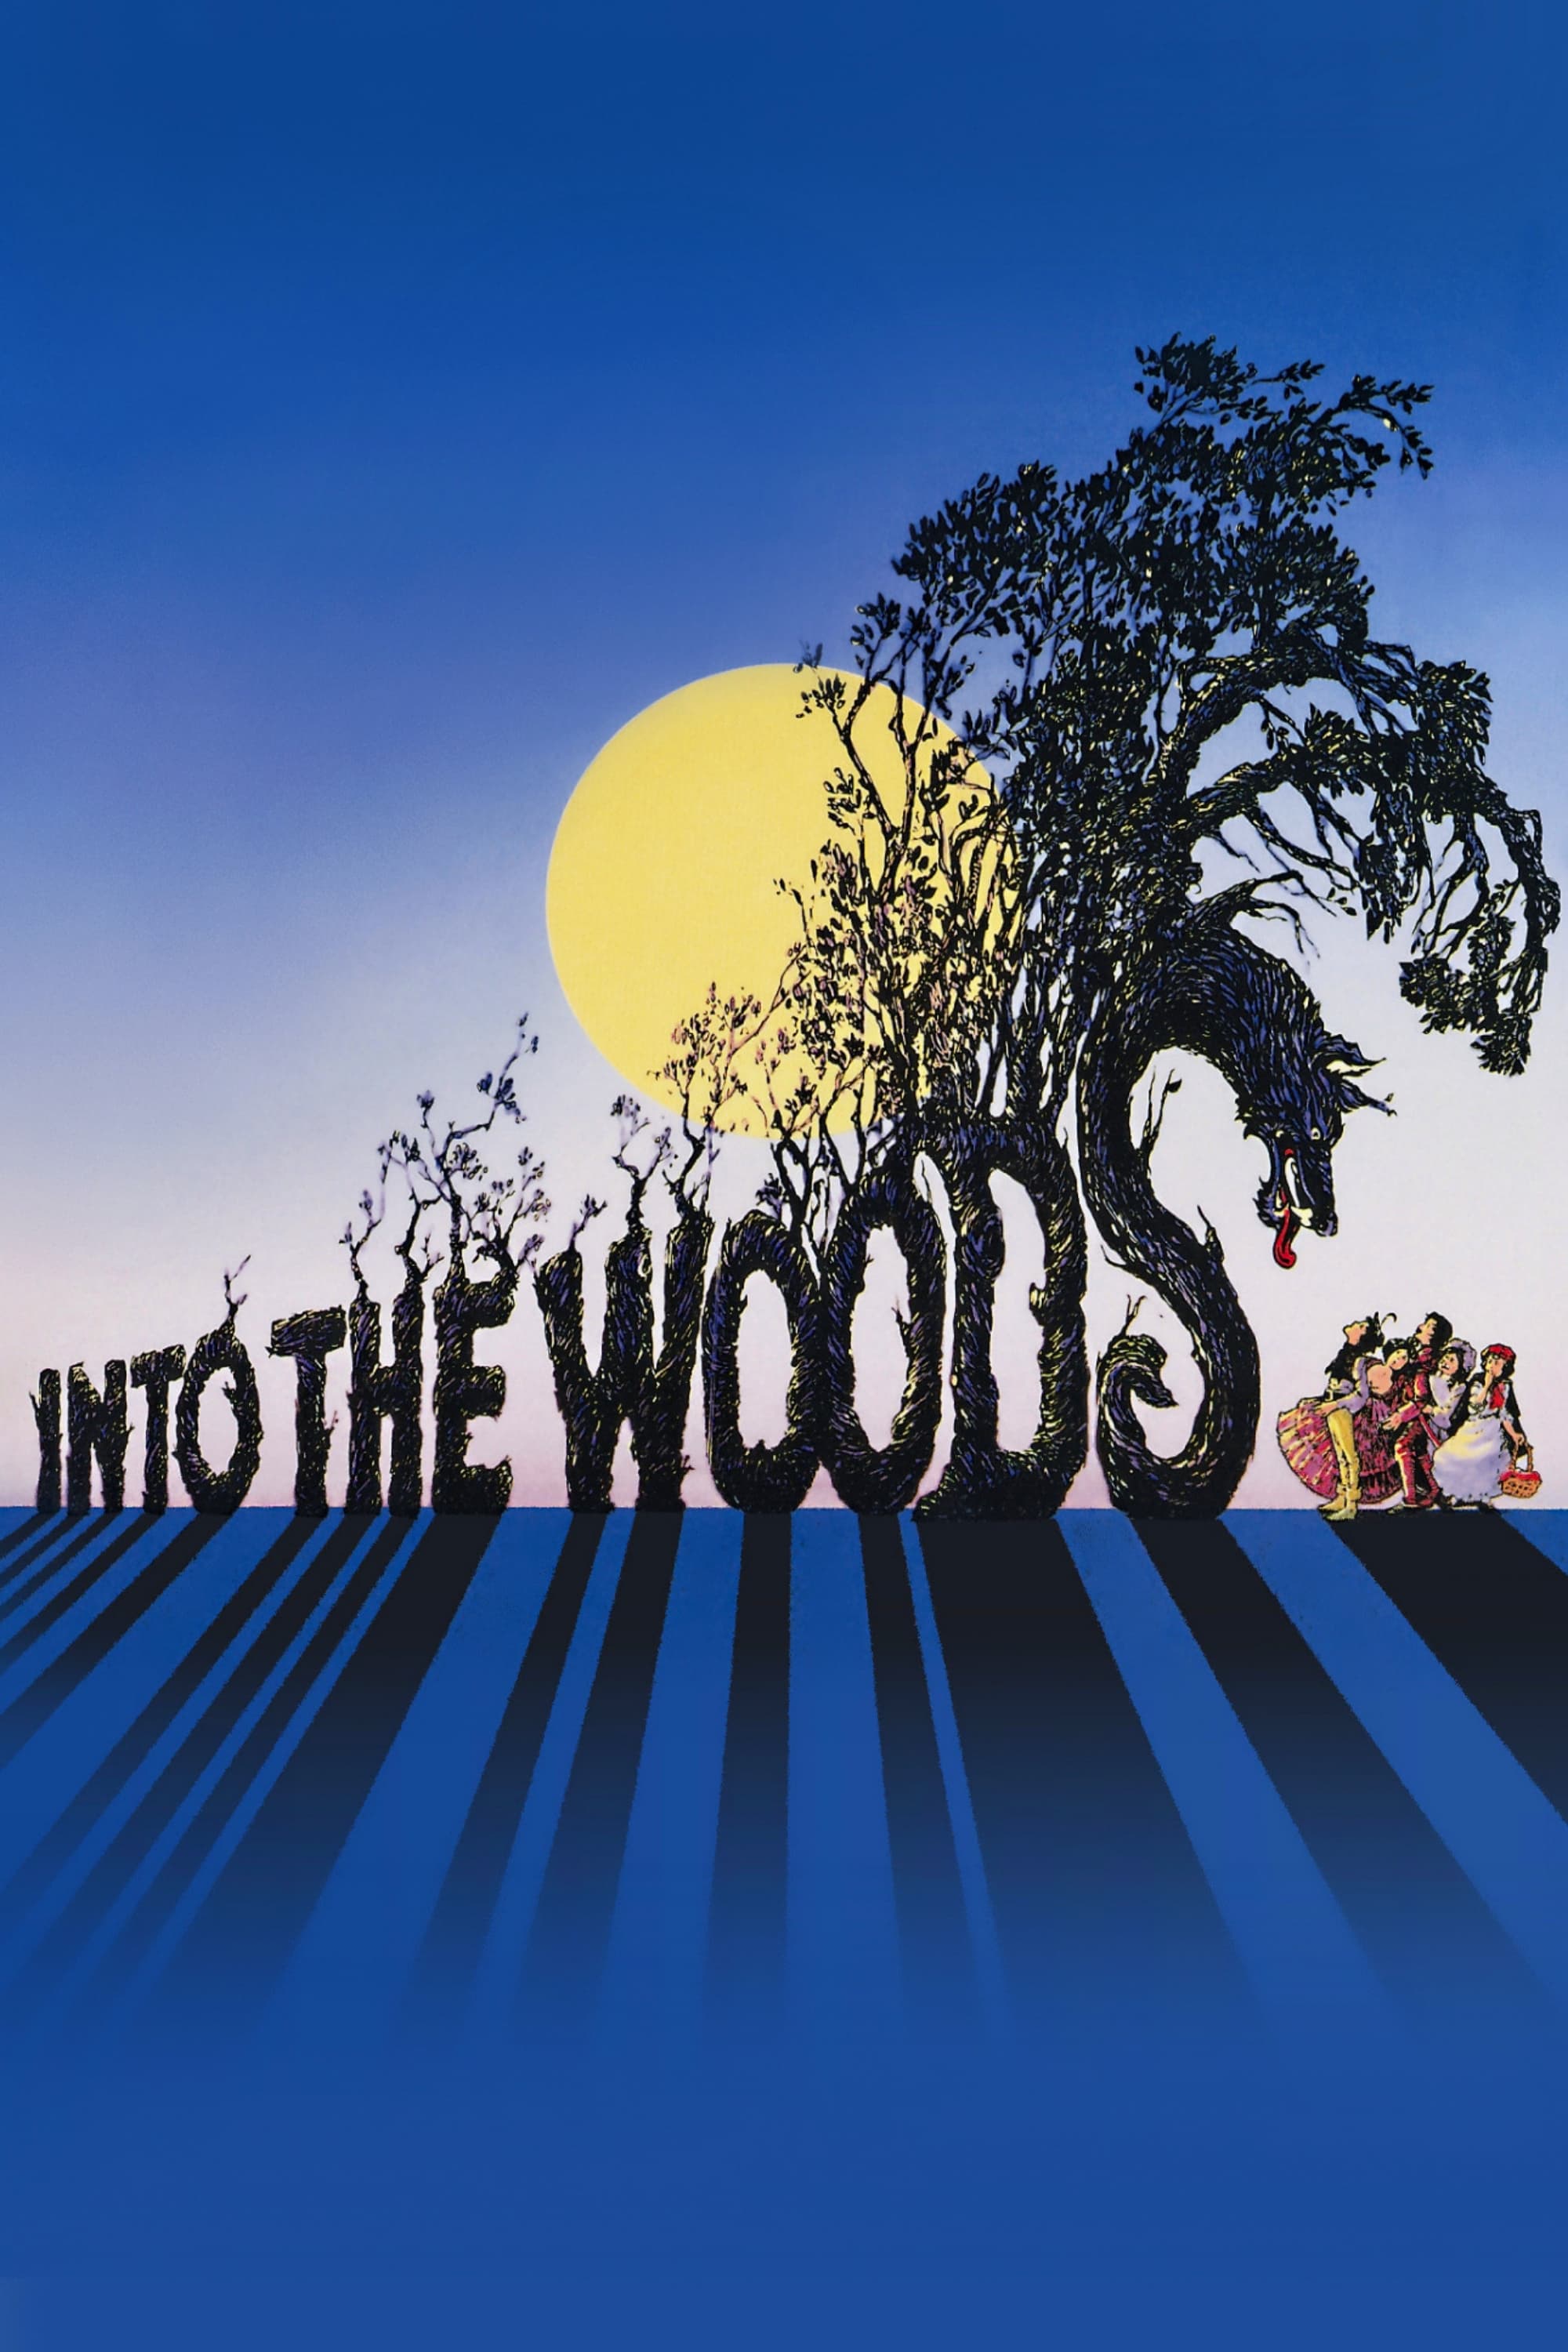 Into the Woods (1991)